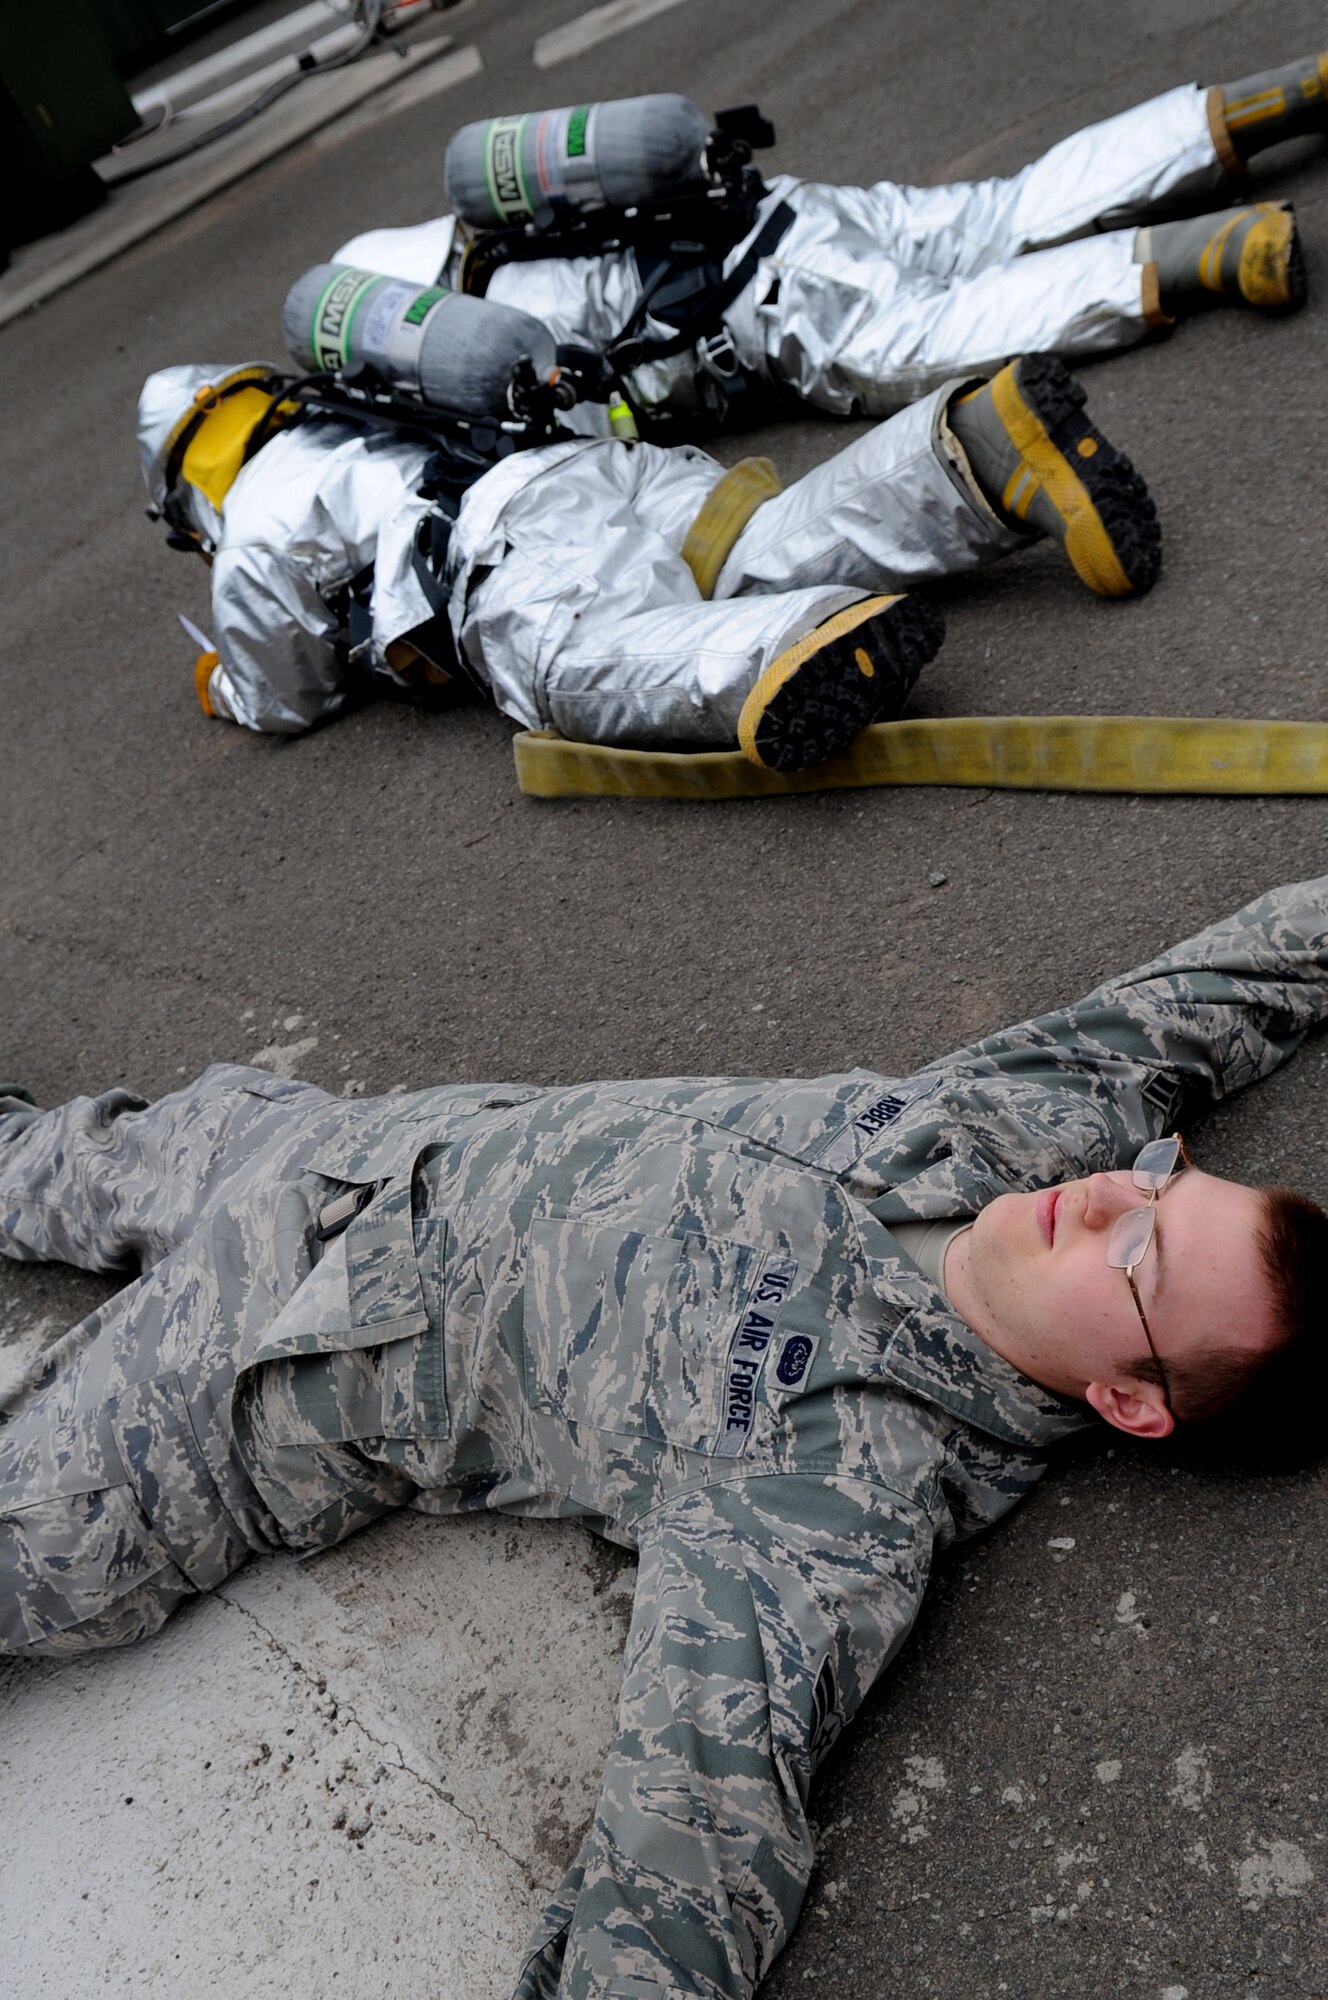 U.S. servicemembers simulate being killed during an exercise on Delta Base, Kapaun Air Station, Germany, March 26, 2010. The 886th Civil Engineer Squadron firefighters conduct at least four exercises per month to ensure readiness in the event of real-world emergency. (U.S. Air Force photo by Airman 1st Class Grovert Fuentes-Contreras)